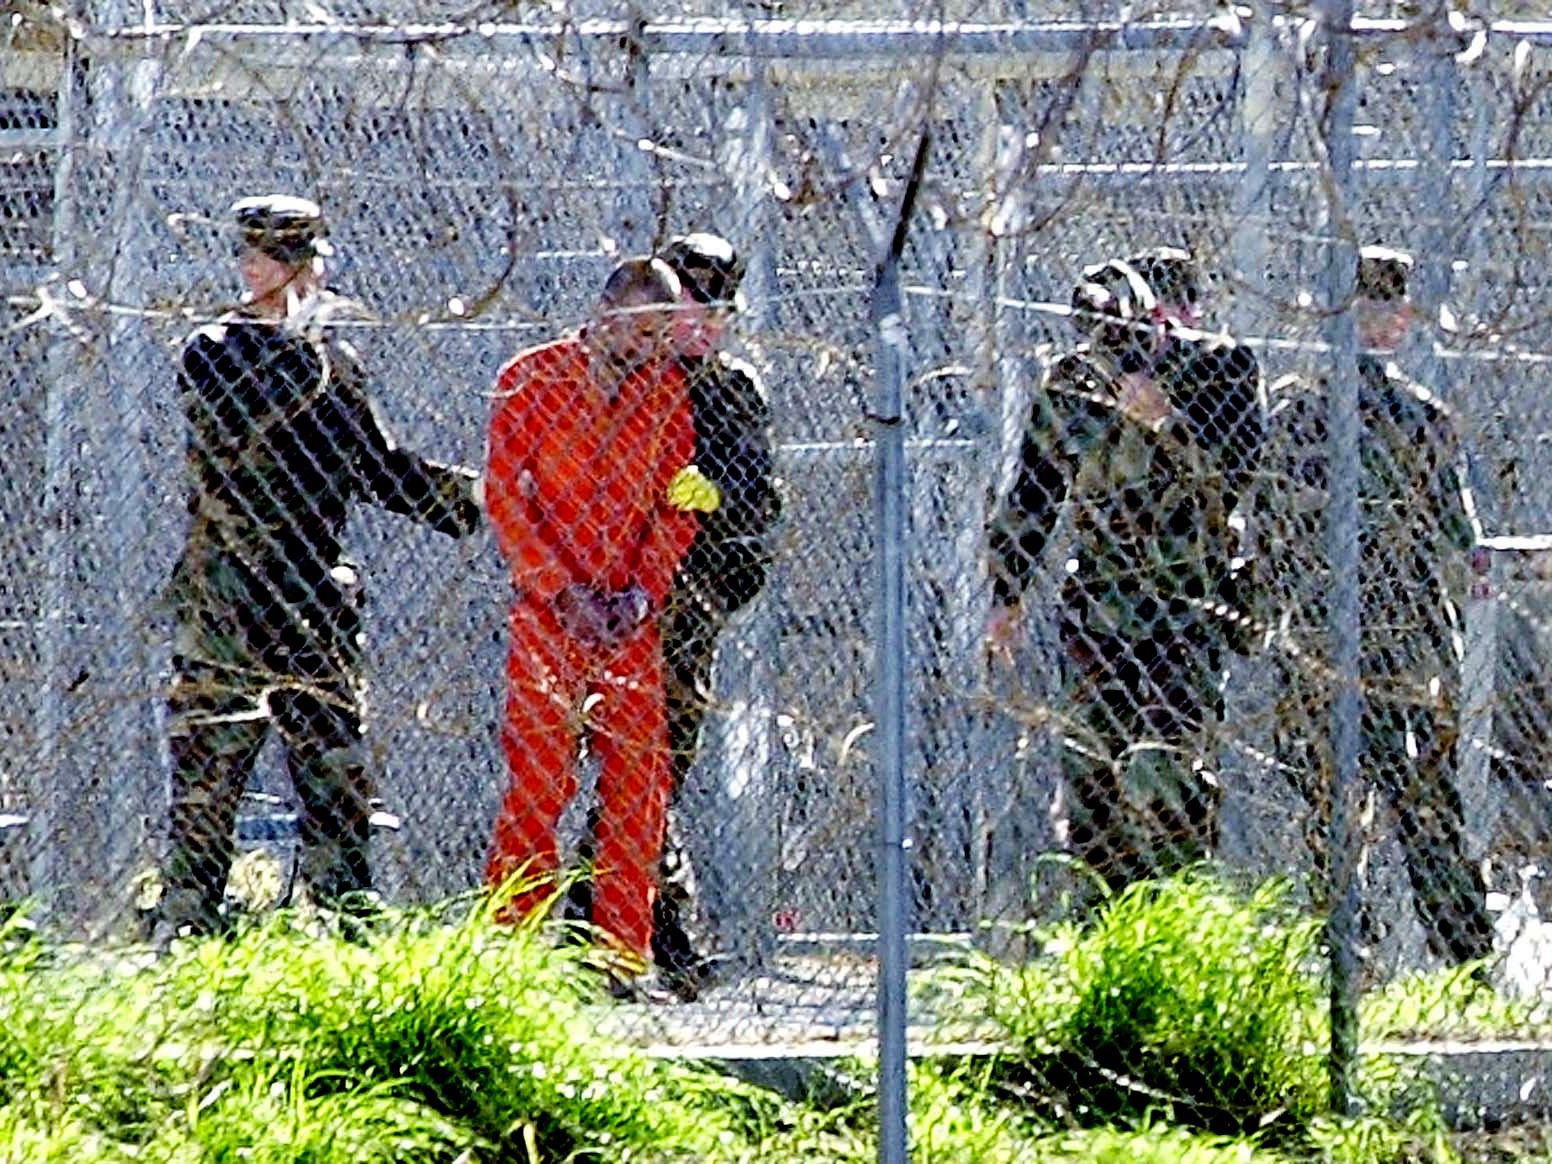 A Guantanamo detainee at Camp X-Ray in the detention facility